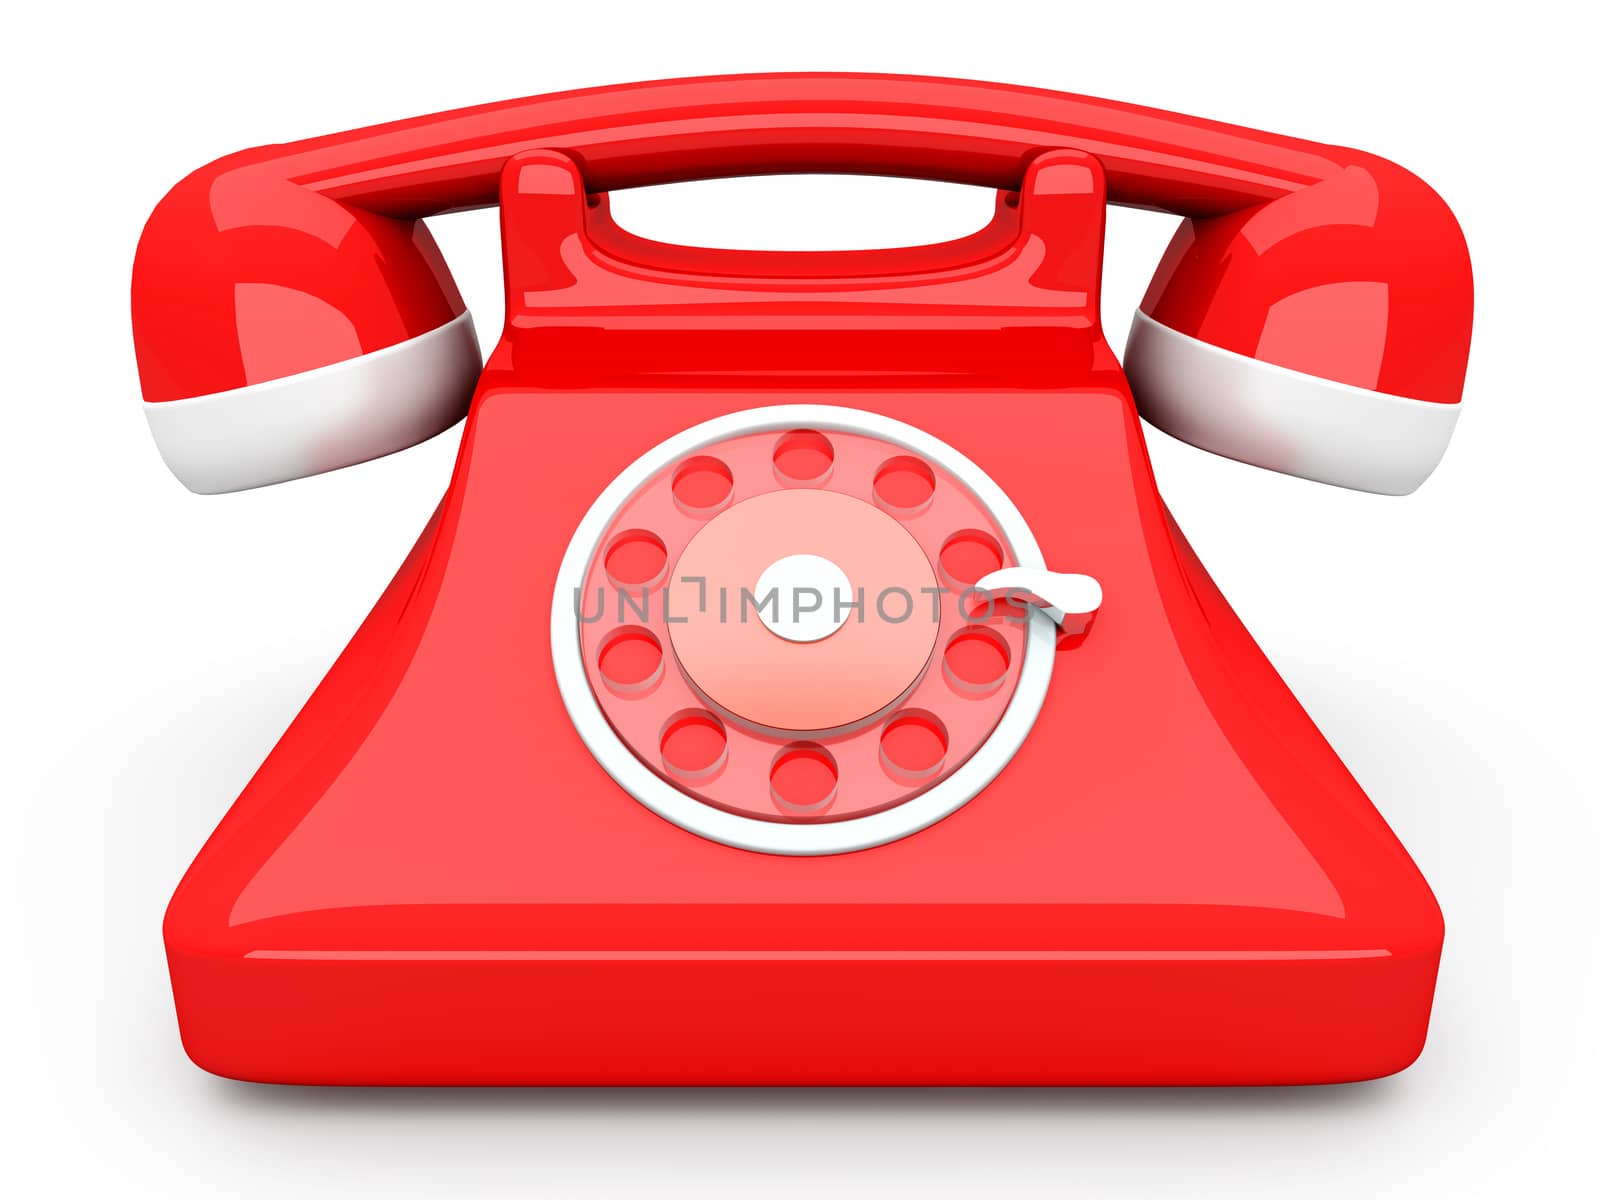 A red, classic Telephone. 3D rendered Illustration. Isolated on white.